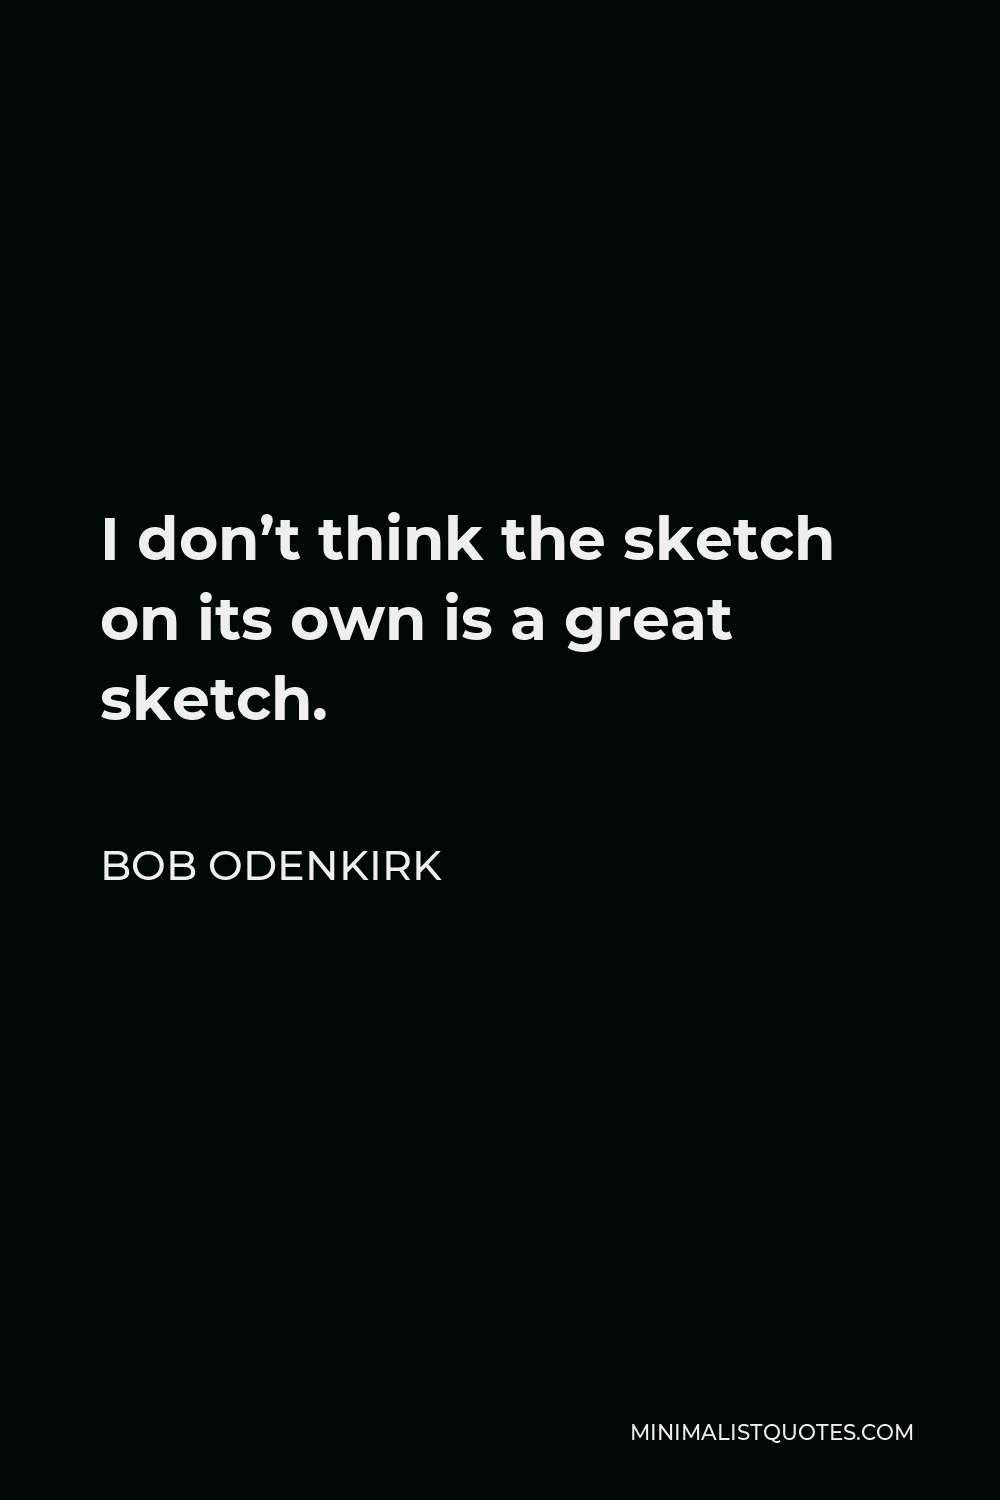 Bob Odenkirk Quote - I don’t think the sketch on its own is a great sketch.